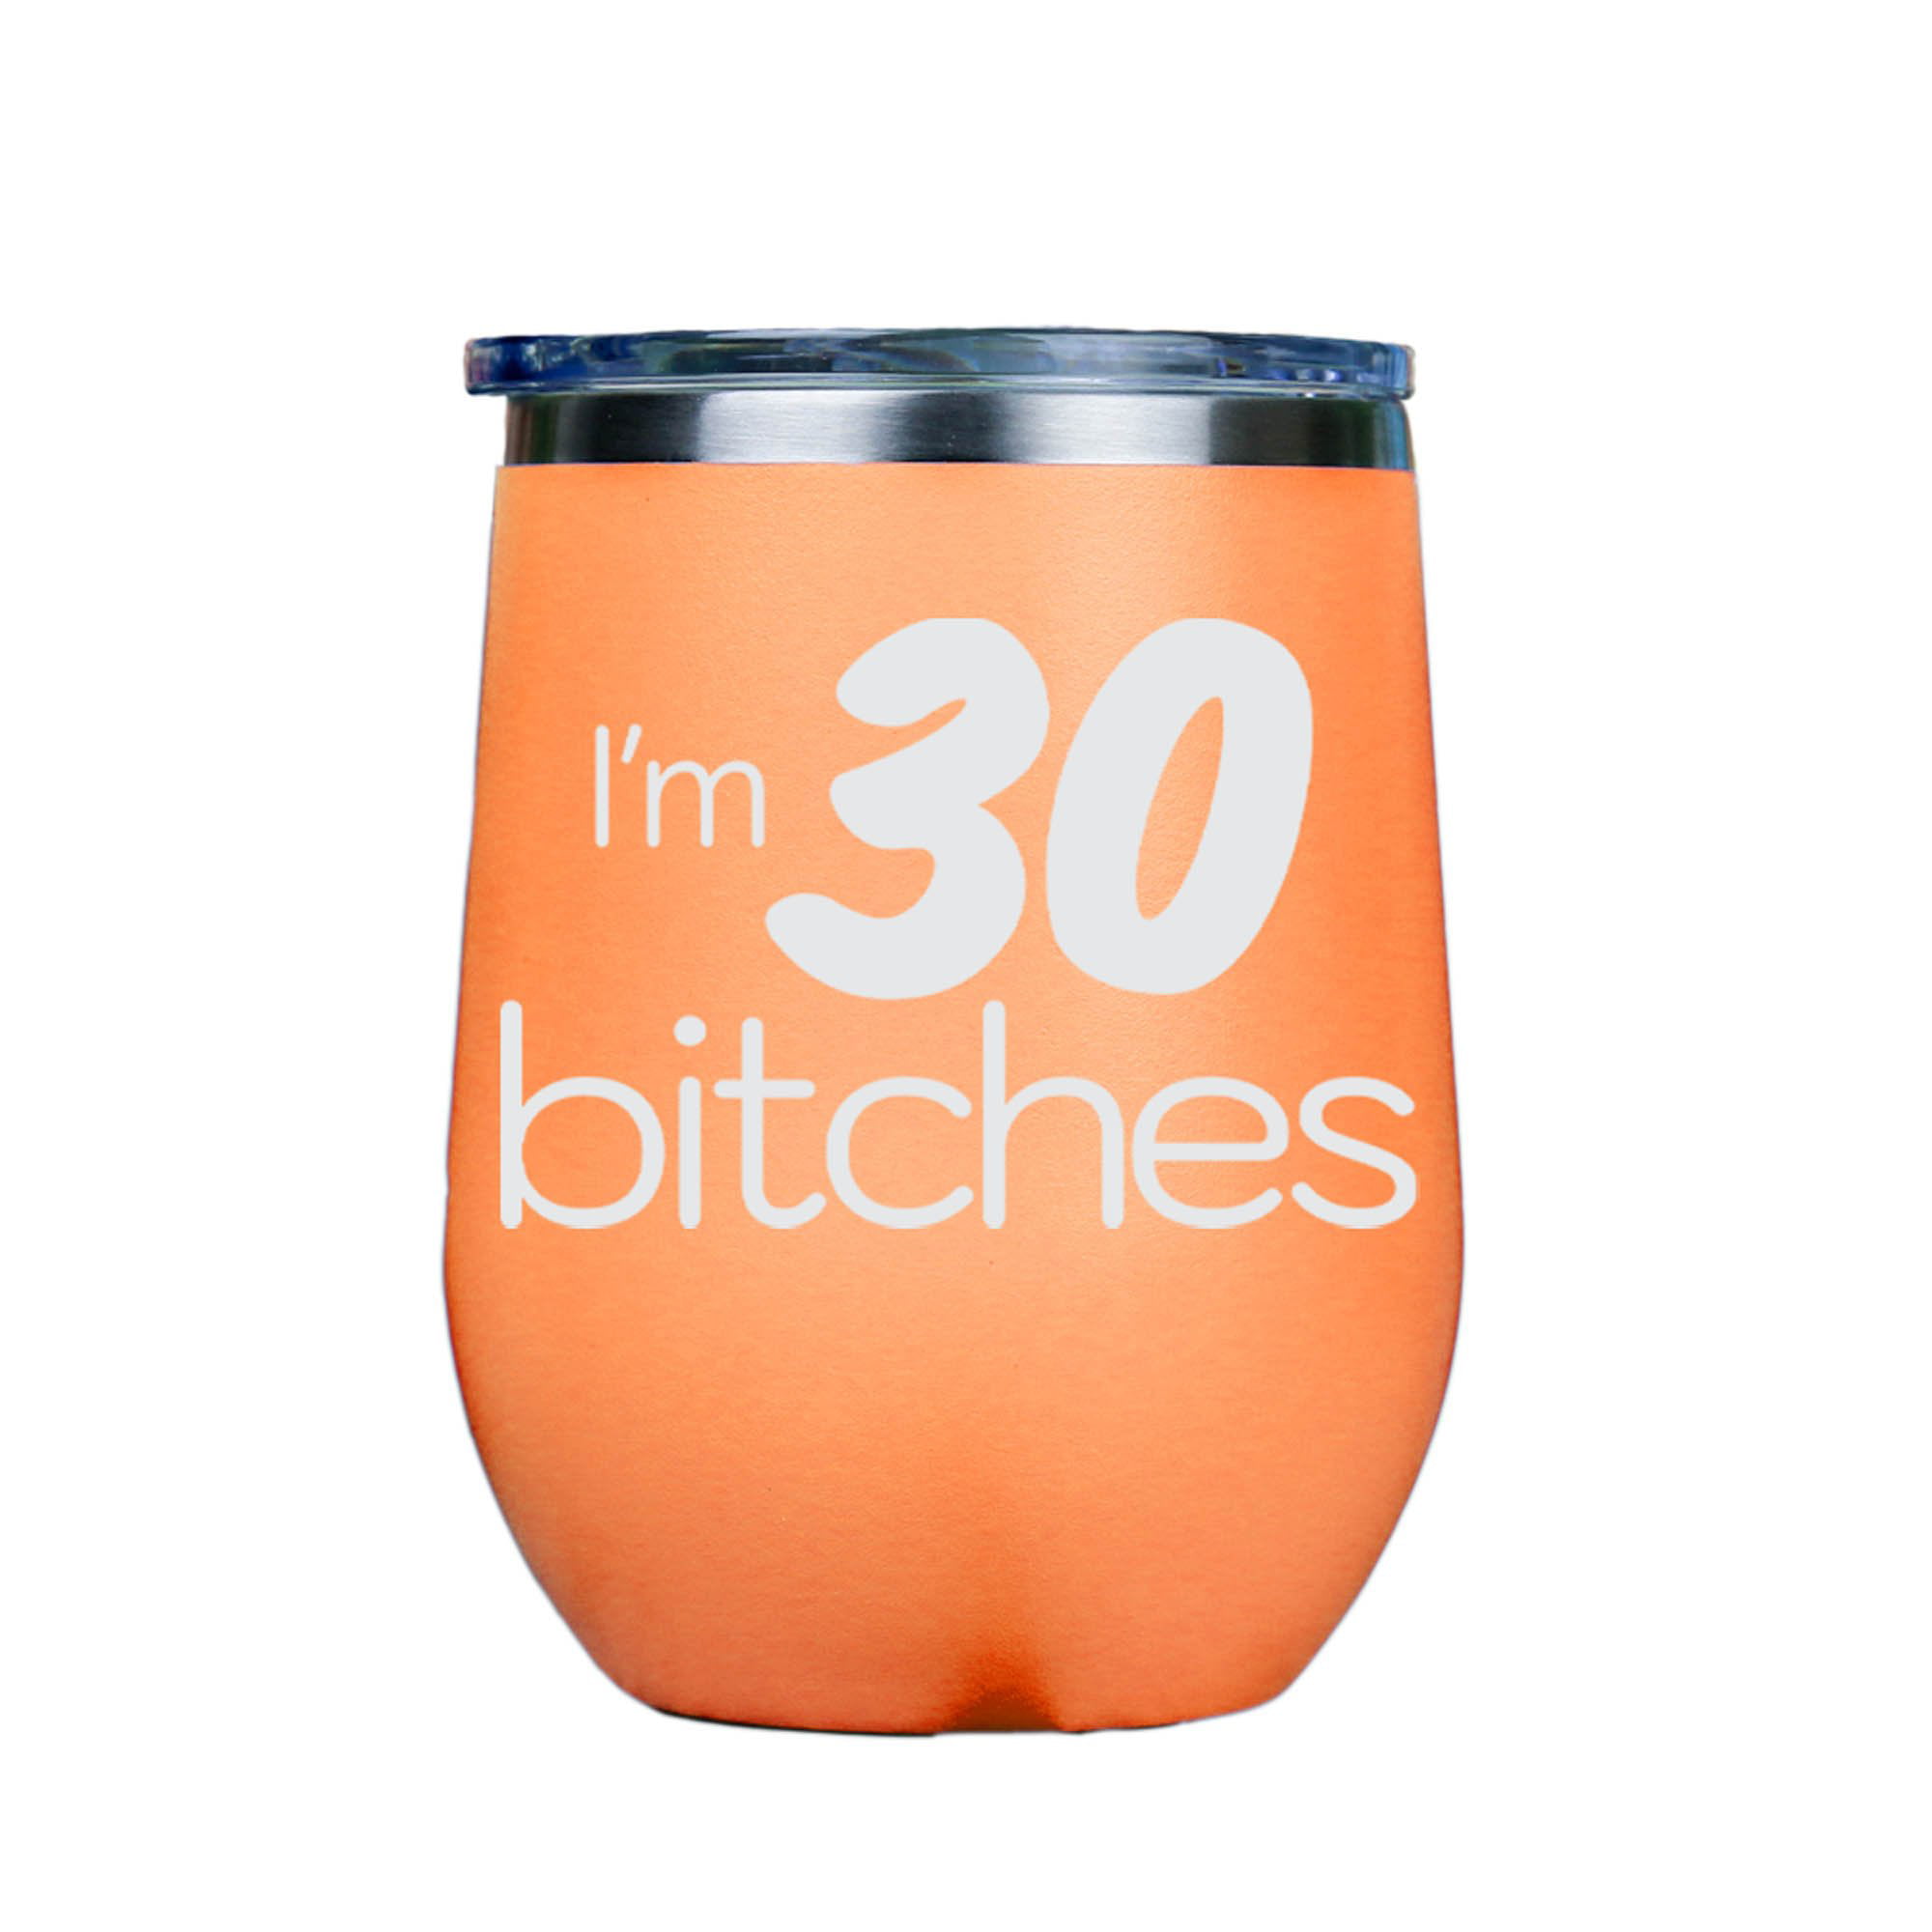 I'm 60 Bitches12oz Stainless Steel Stemless Wine Tumbler 